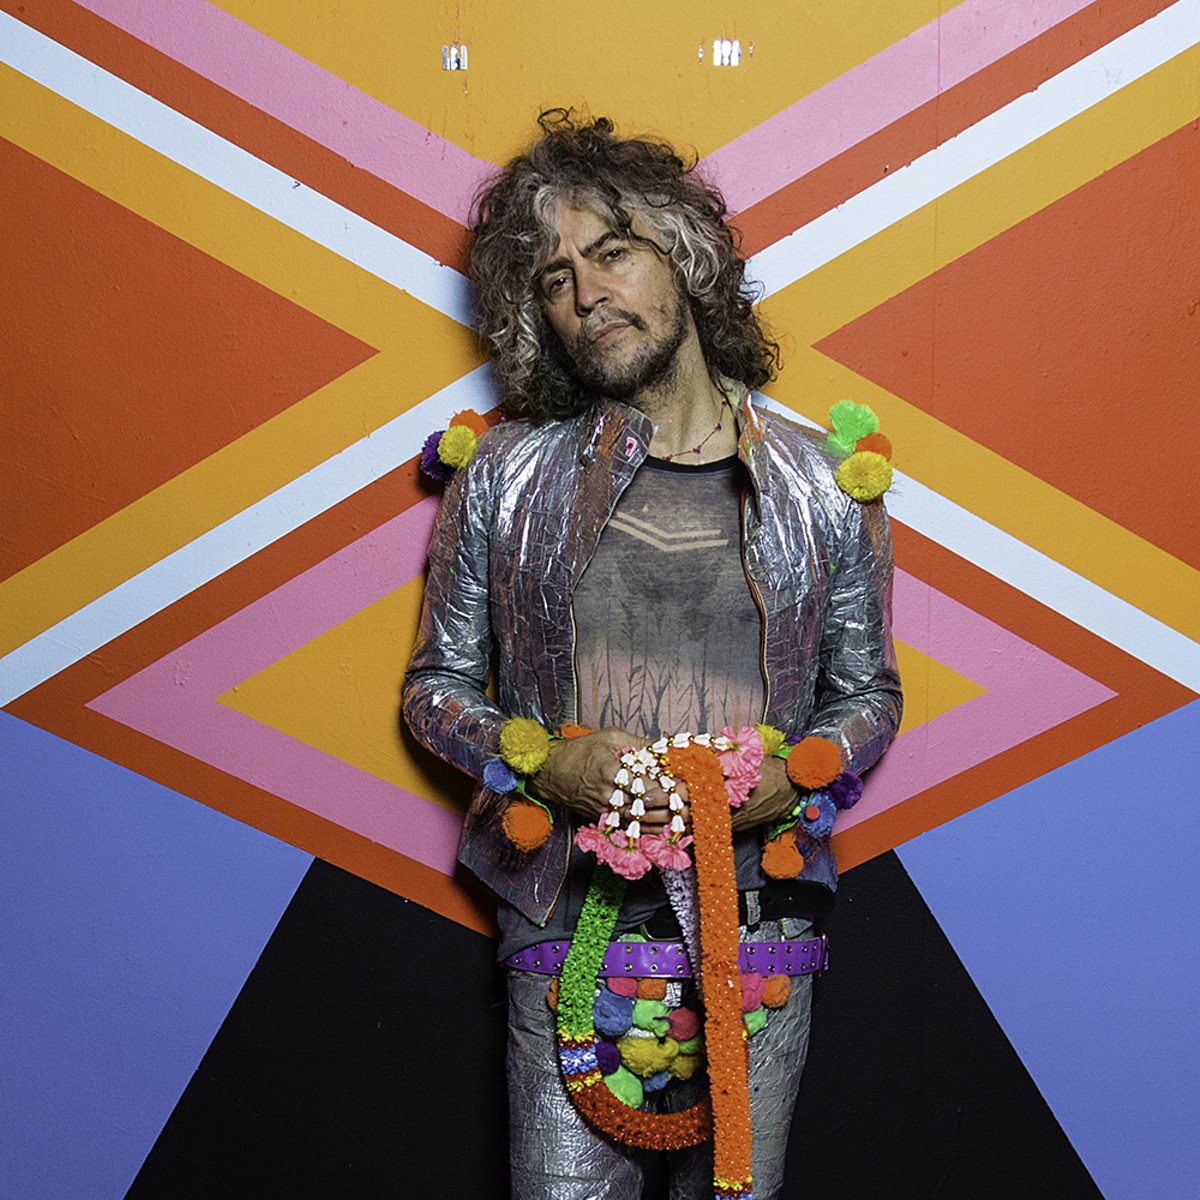 Flaming Lips want to make every show a New Year's bash